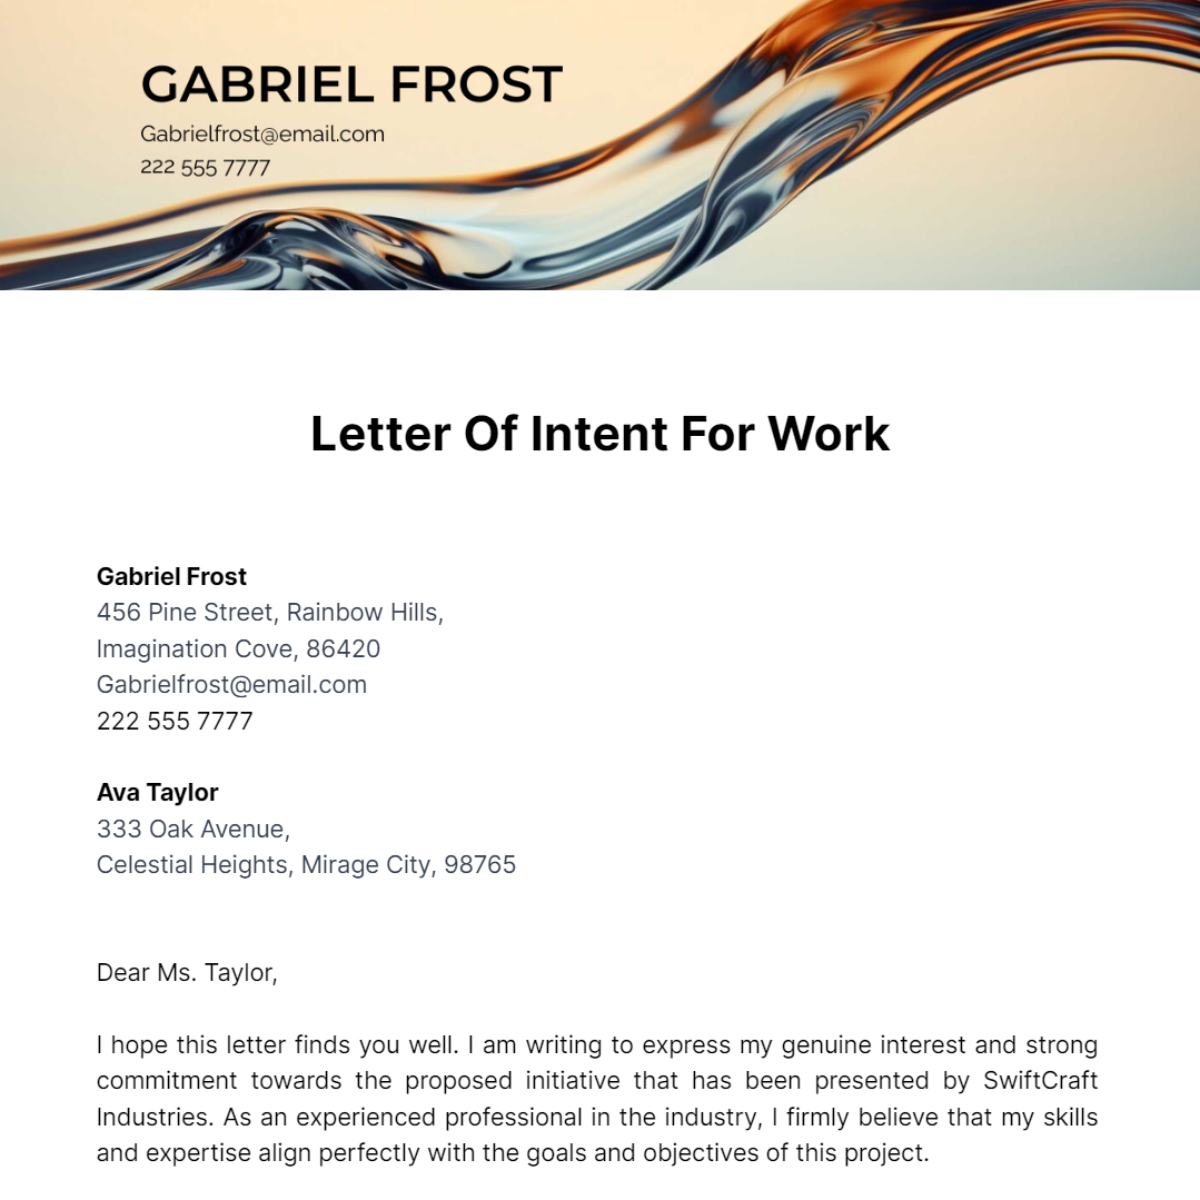 Letter Of Intent For Work Template